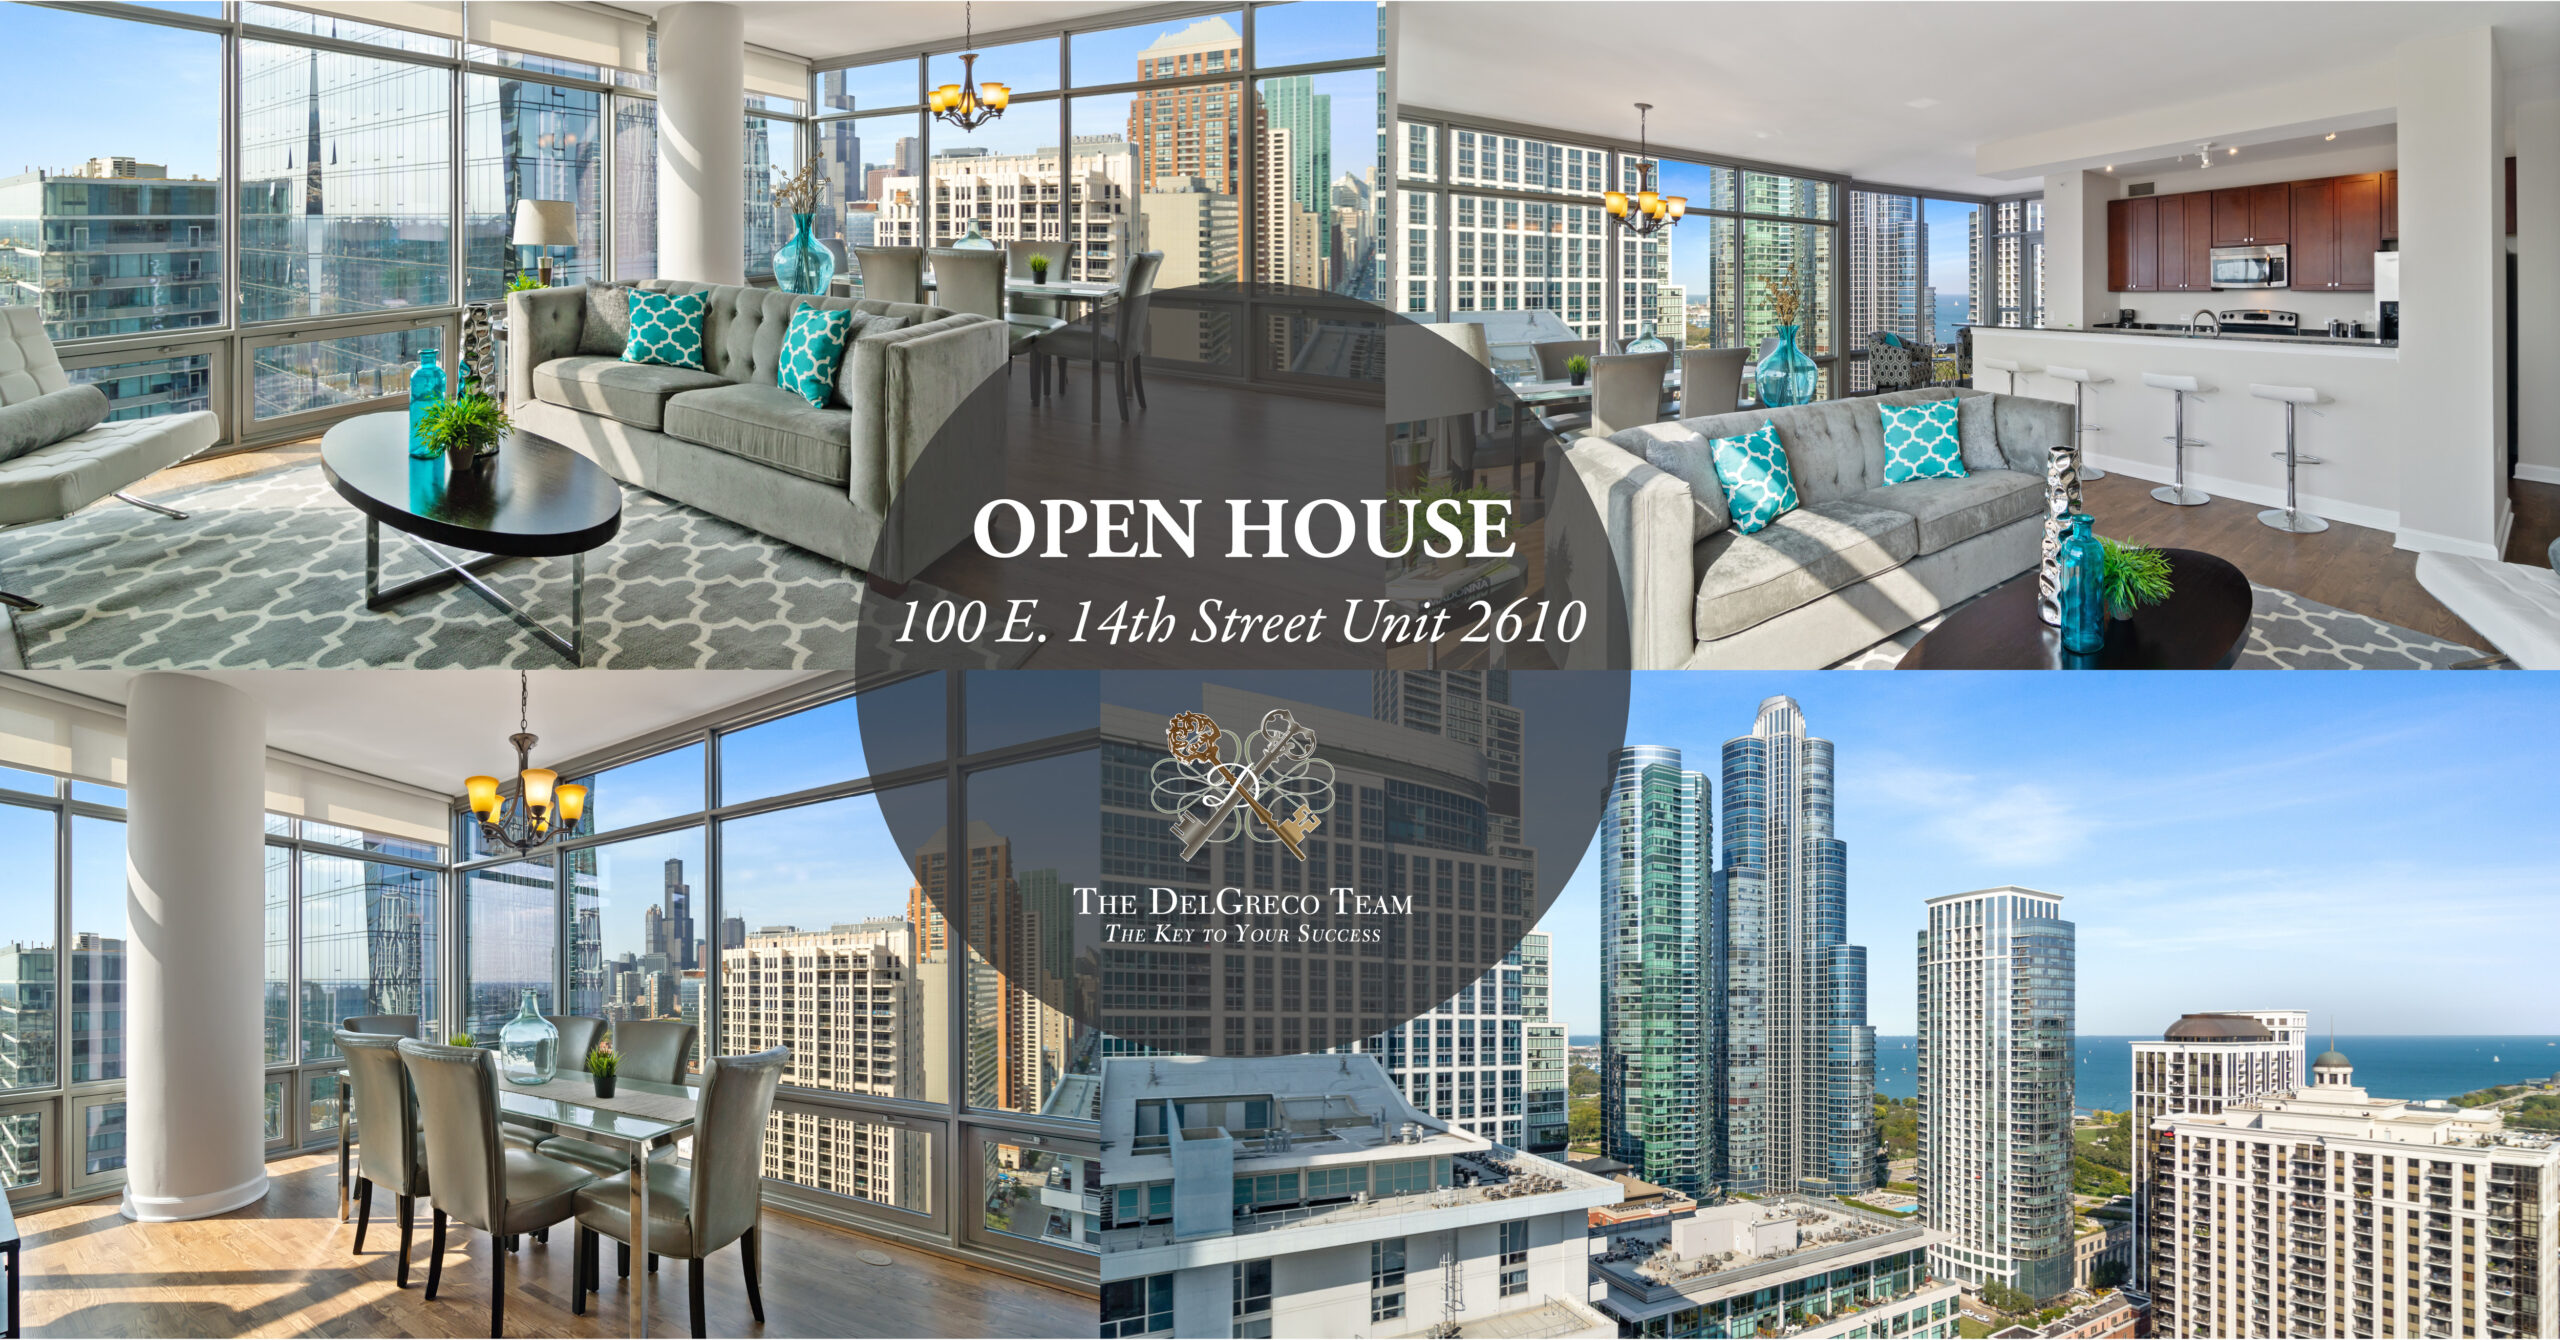 South Loop - 100 East 14th Street Unit 2610, Chicago, IL 60605